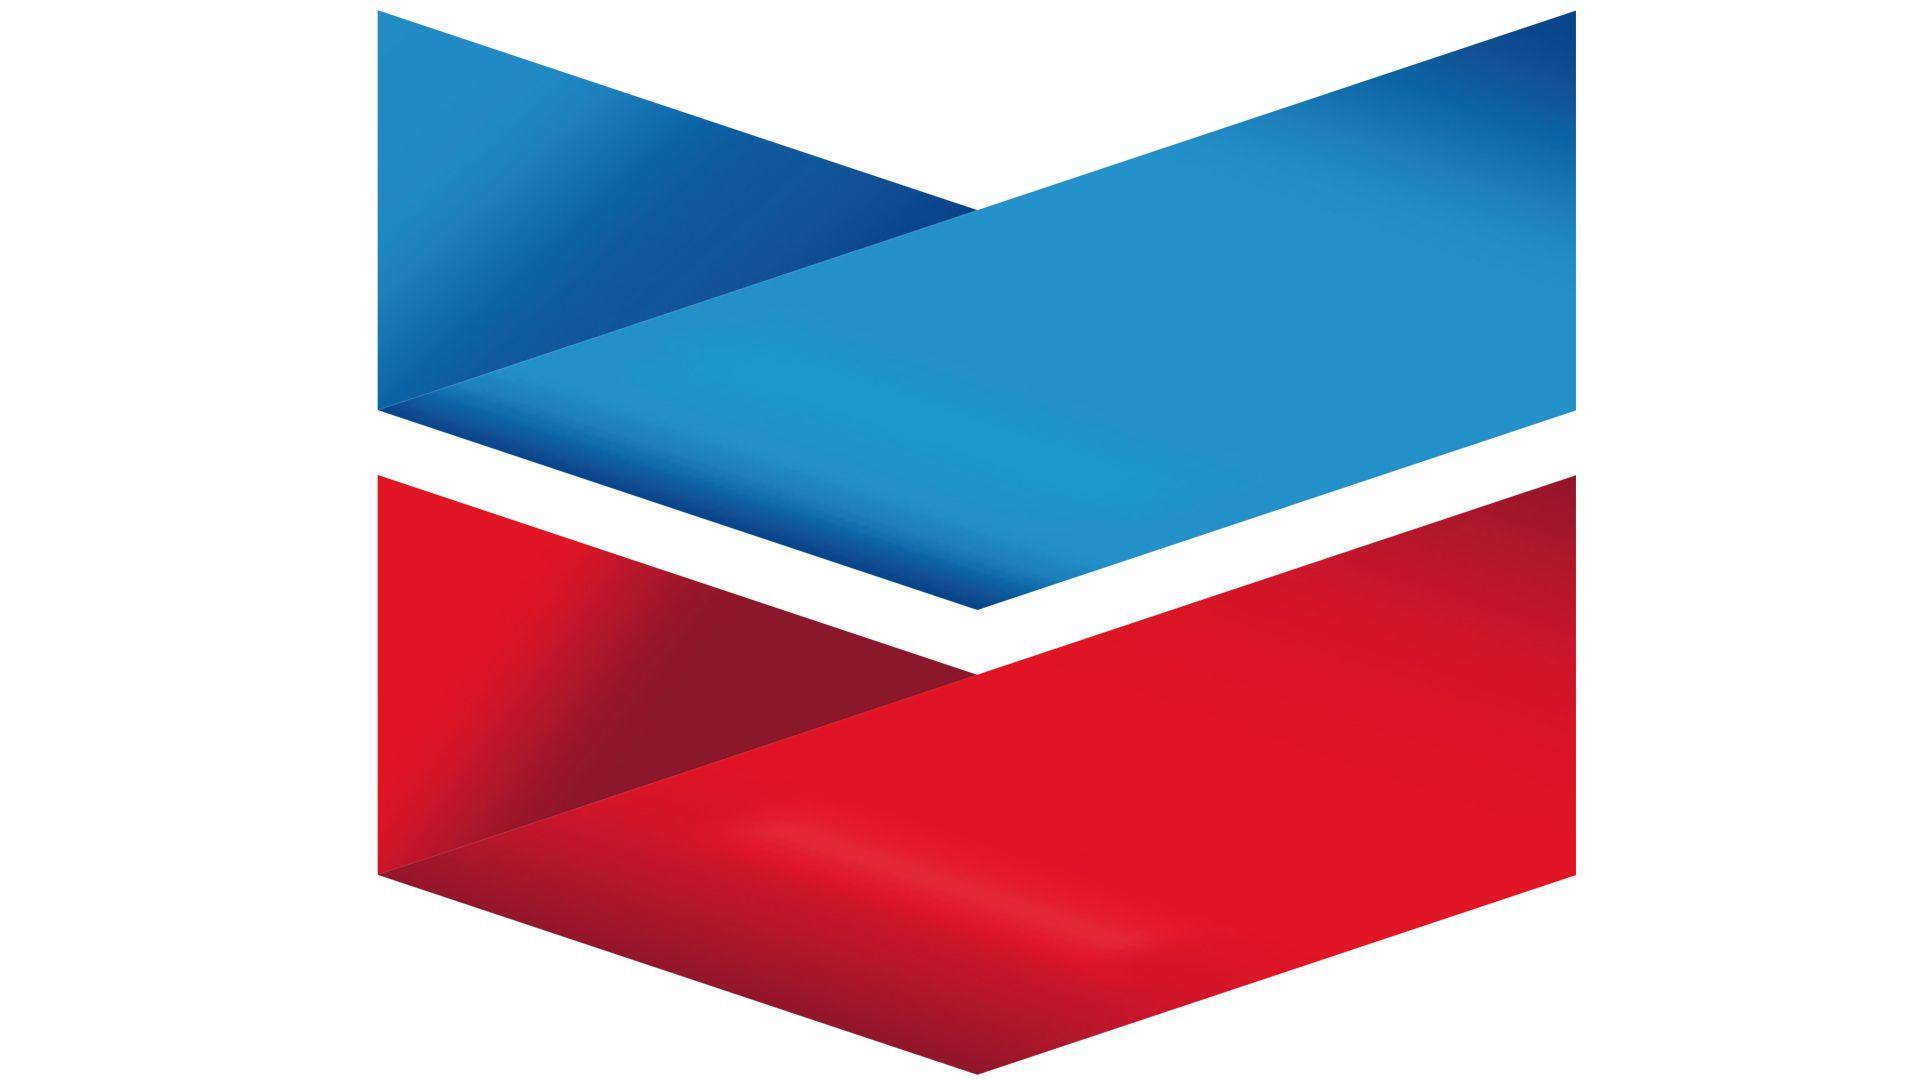 Blue and Red Chevron Logo - Chevron Logo, Chevron Symbol, Meaning, History and Evolution